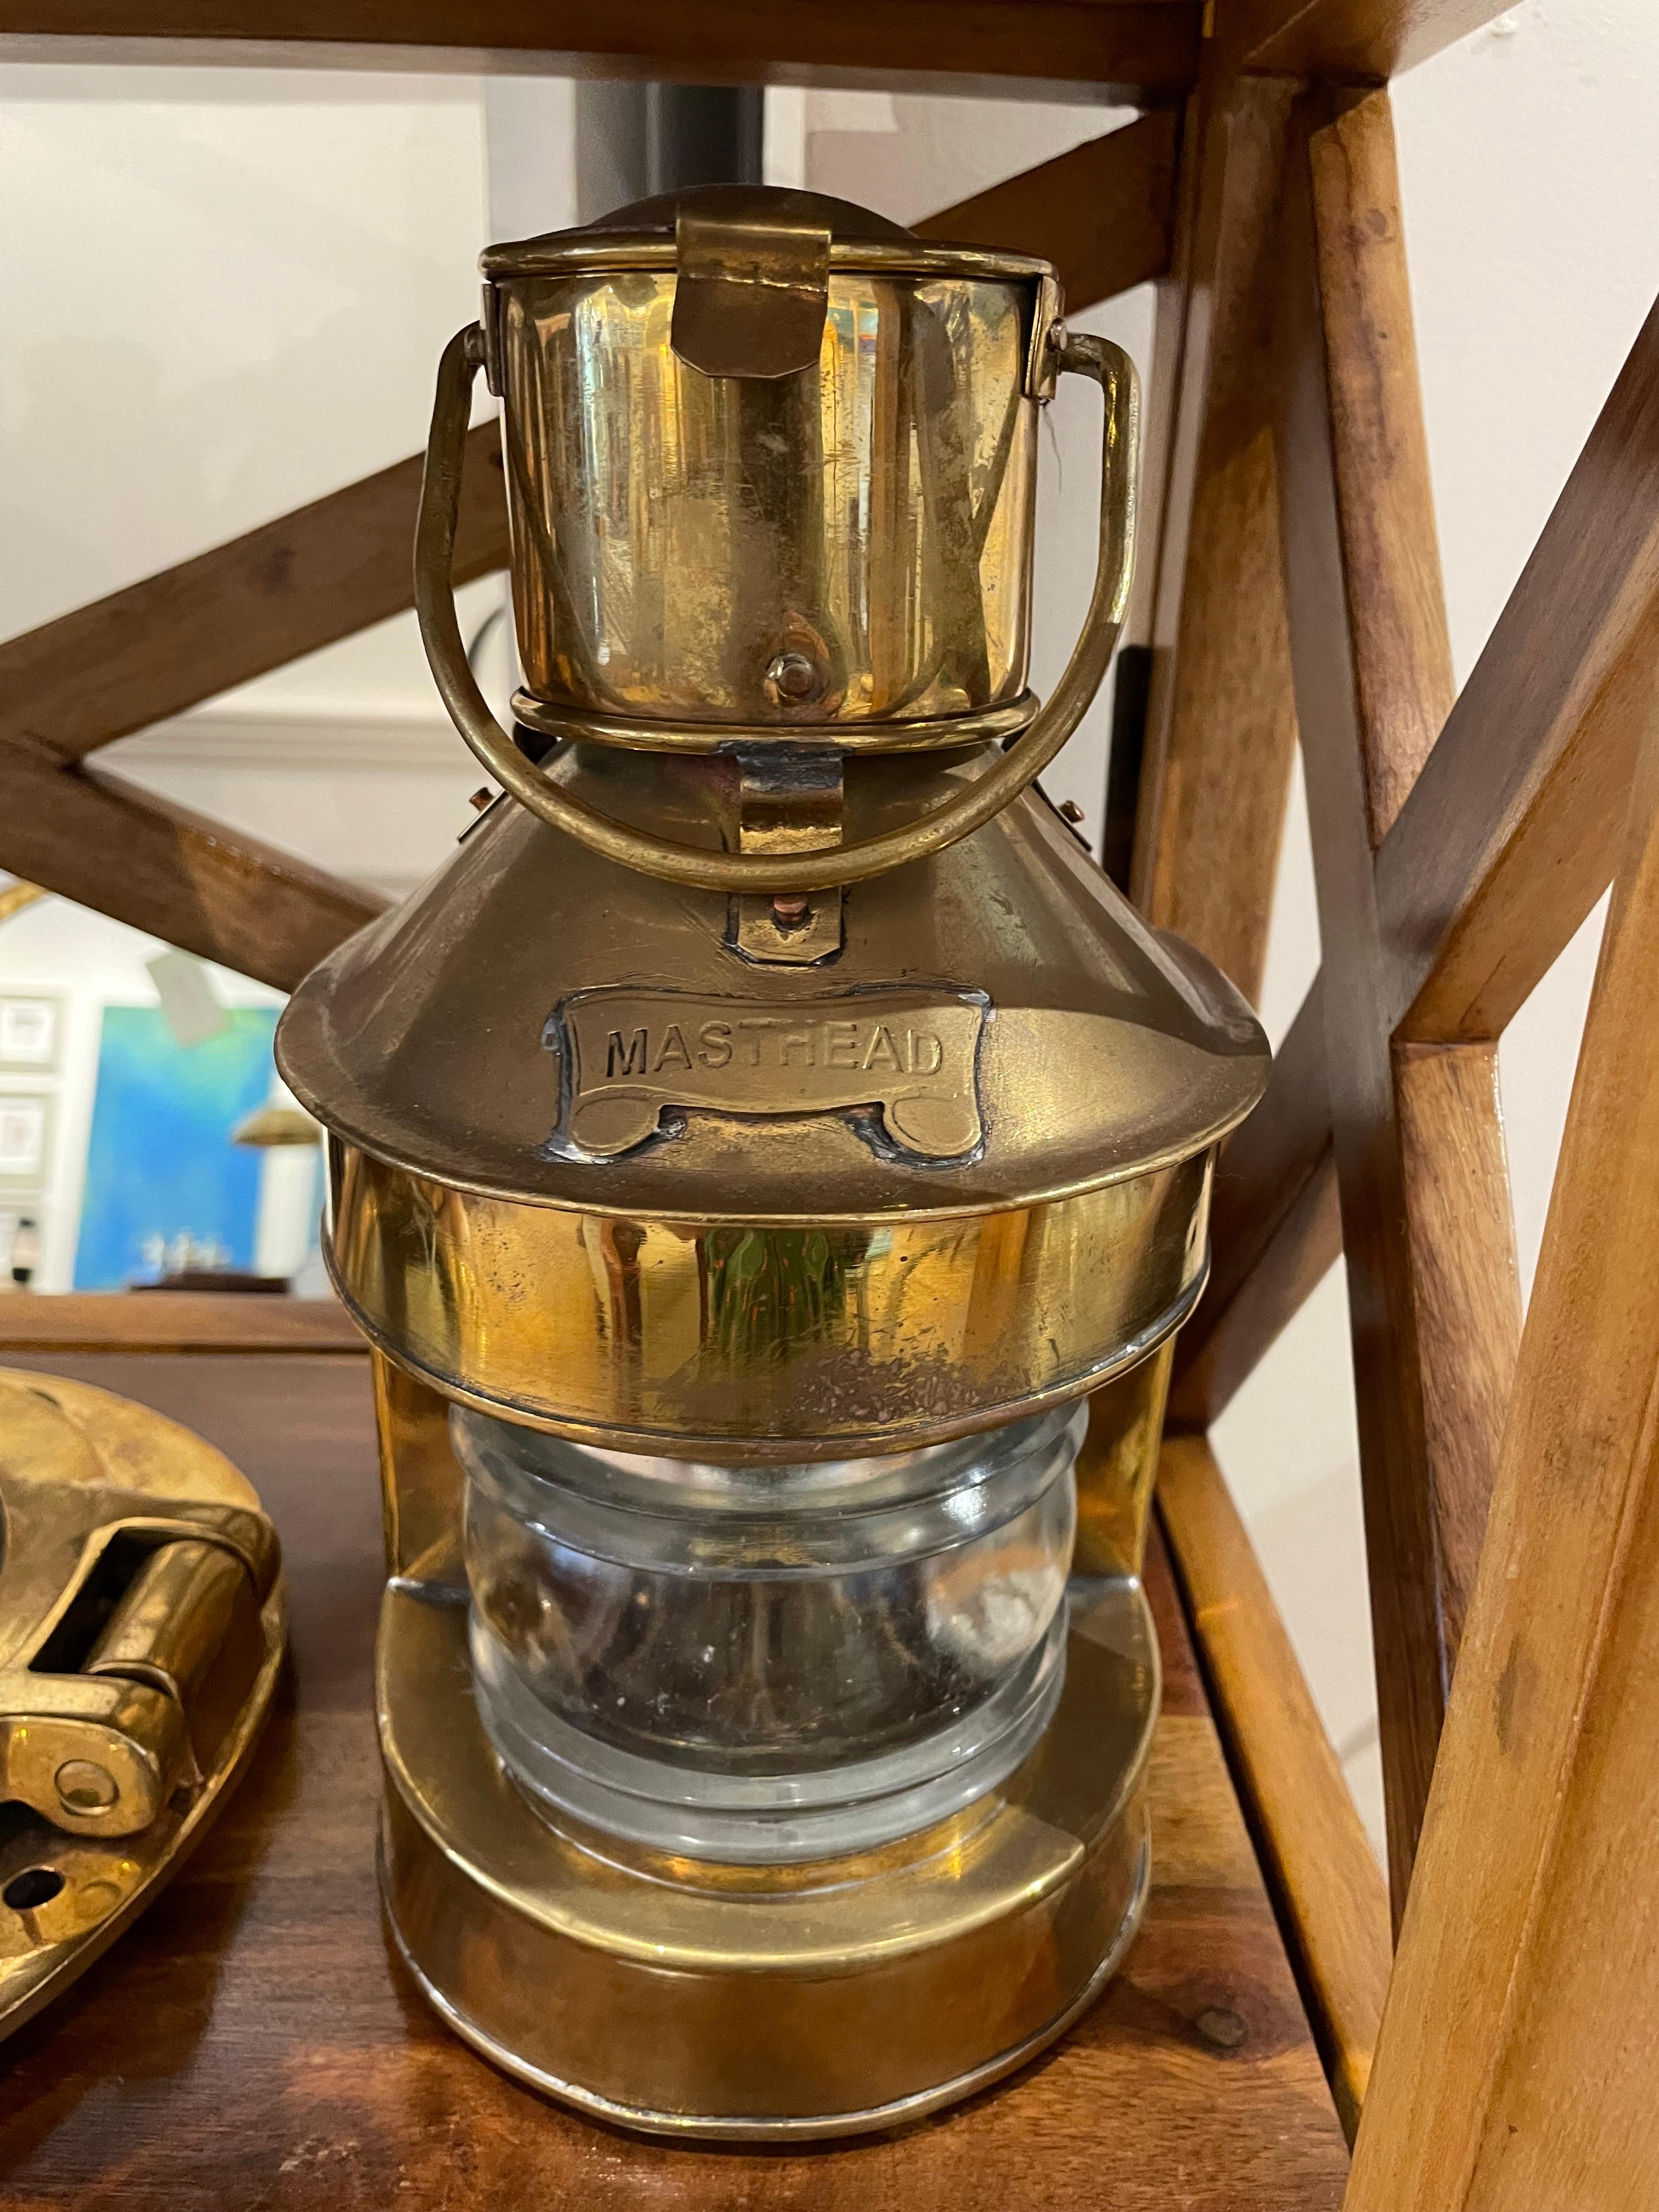 Pair of Masthead Brass Ship Navigational Nautical Lights In Good Condition For Sale In Nantucket, MA